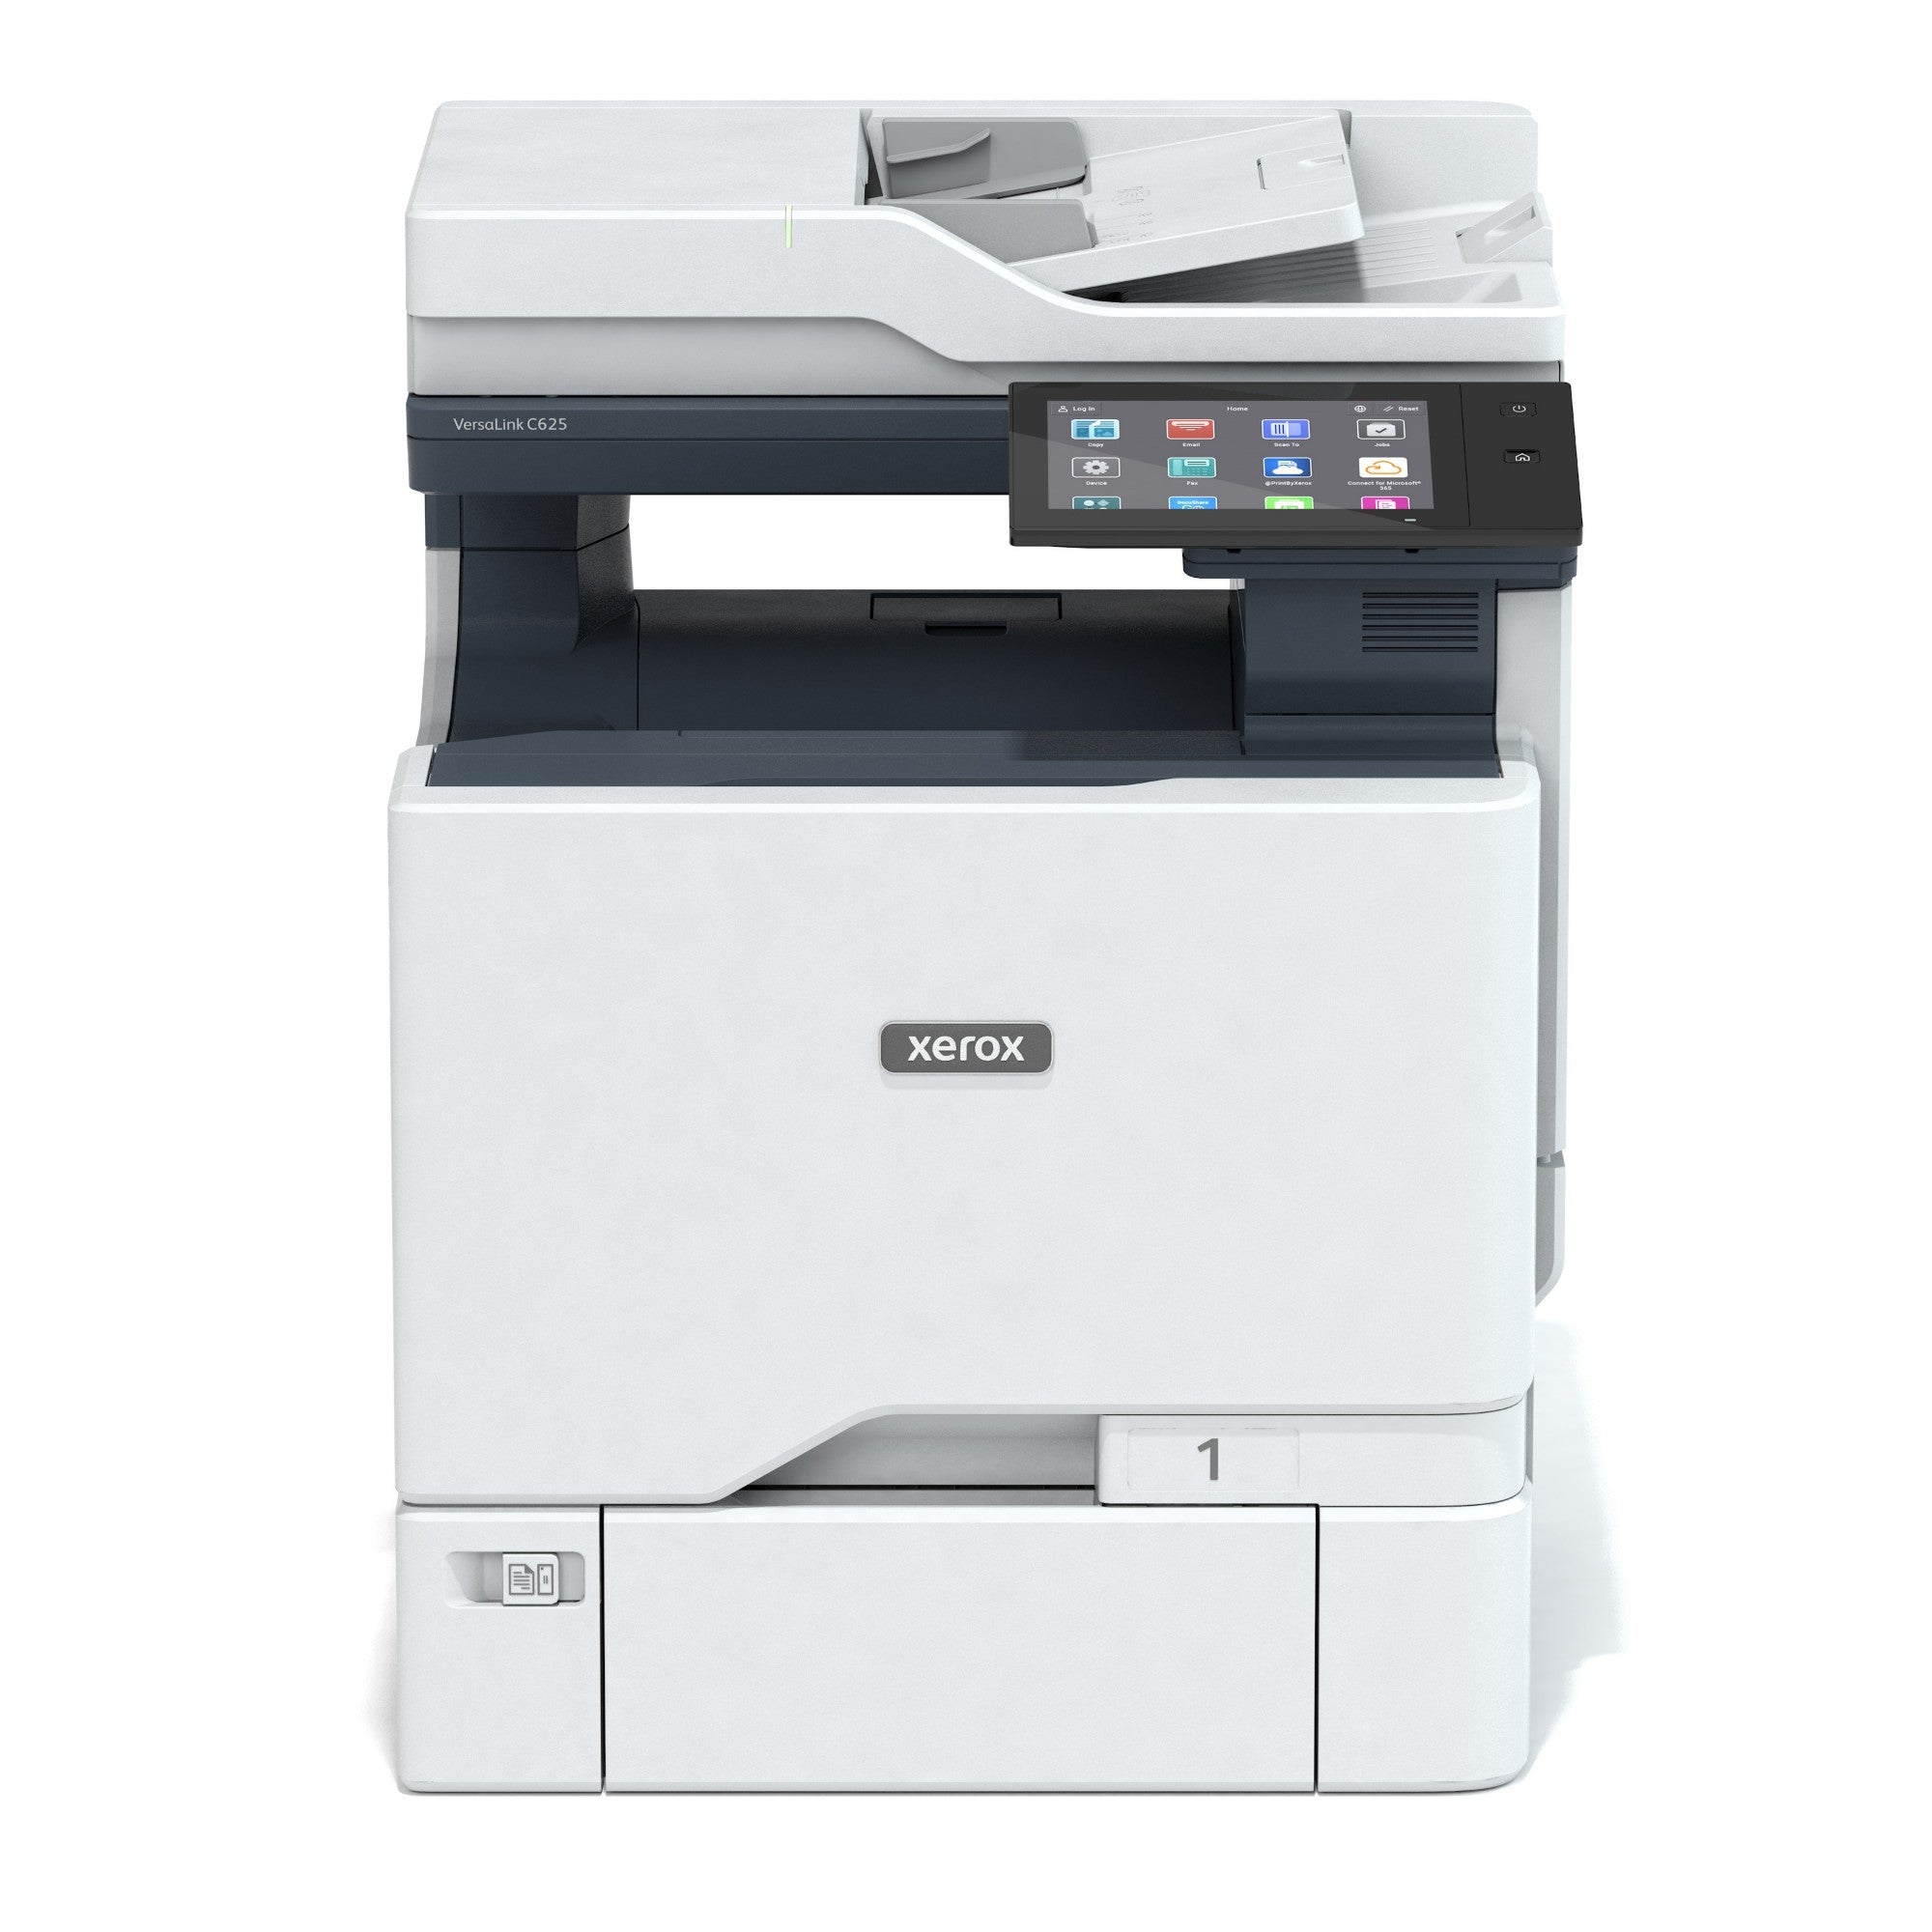 Xerox VersaLink C625 Multifunction Colour Printer. Workgroup all-in-one.